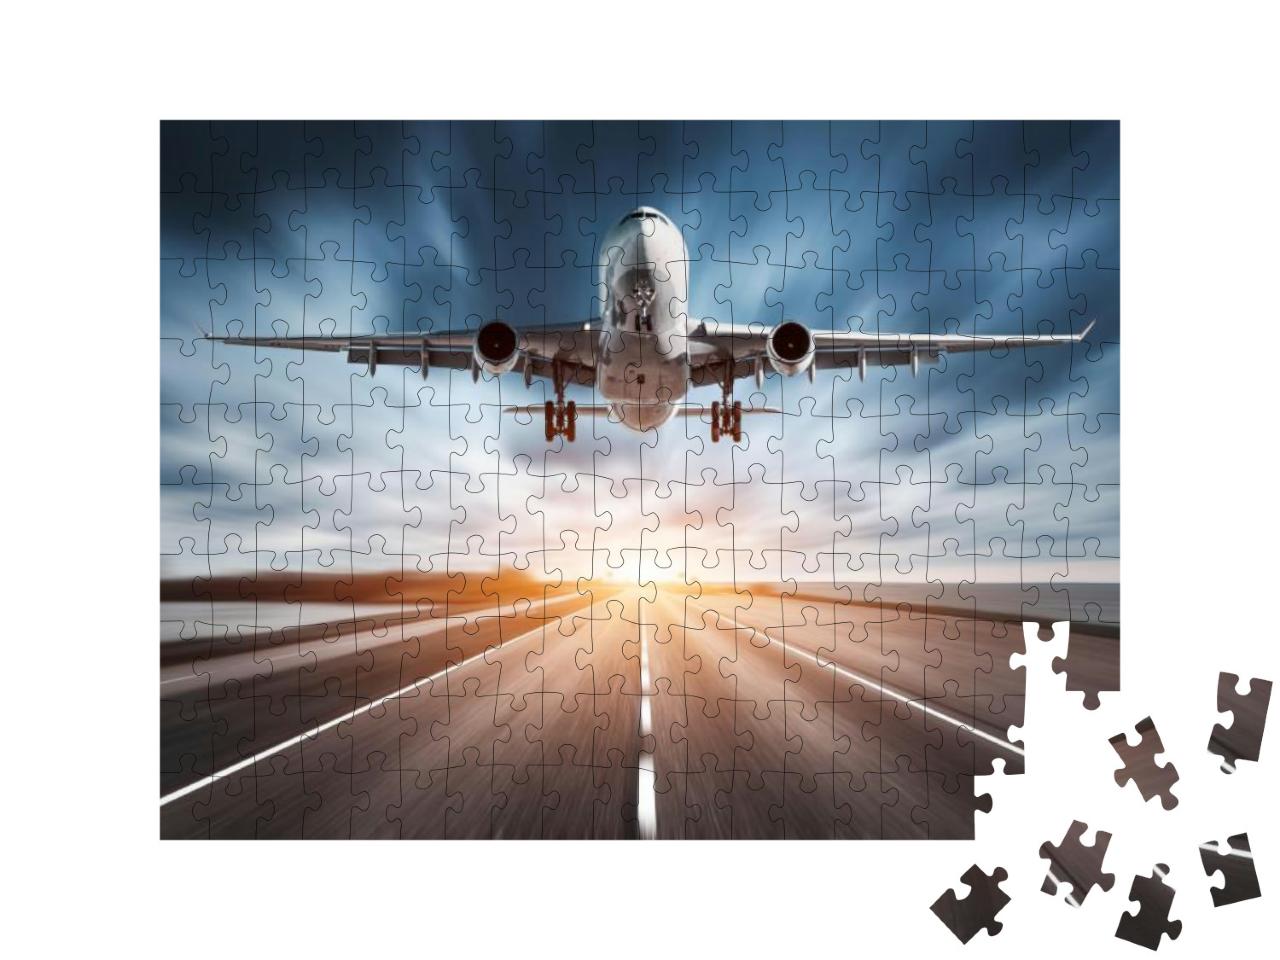 Airplane & Road with Motion Blur Effect At Sunset. Landsc... Jigsaw Puzzle with 200 pieces